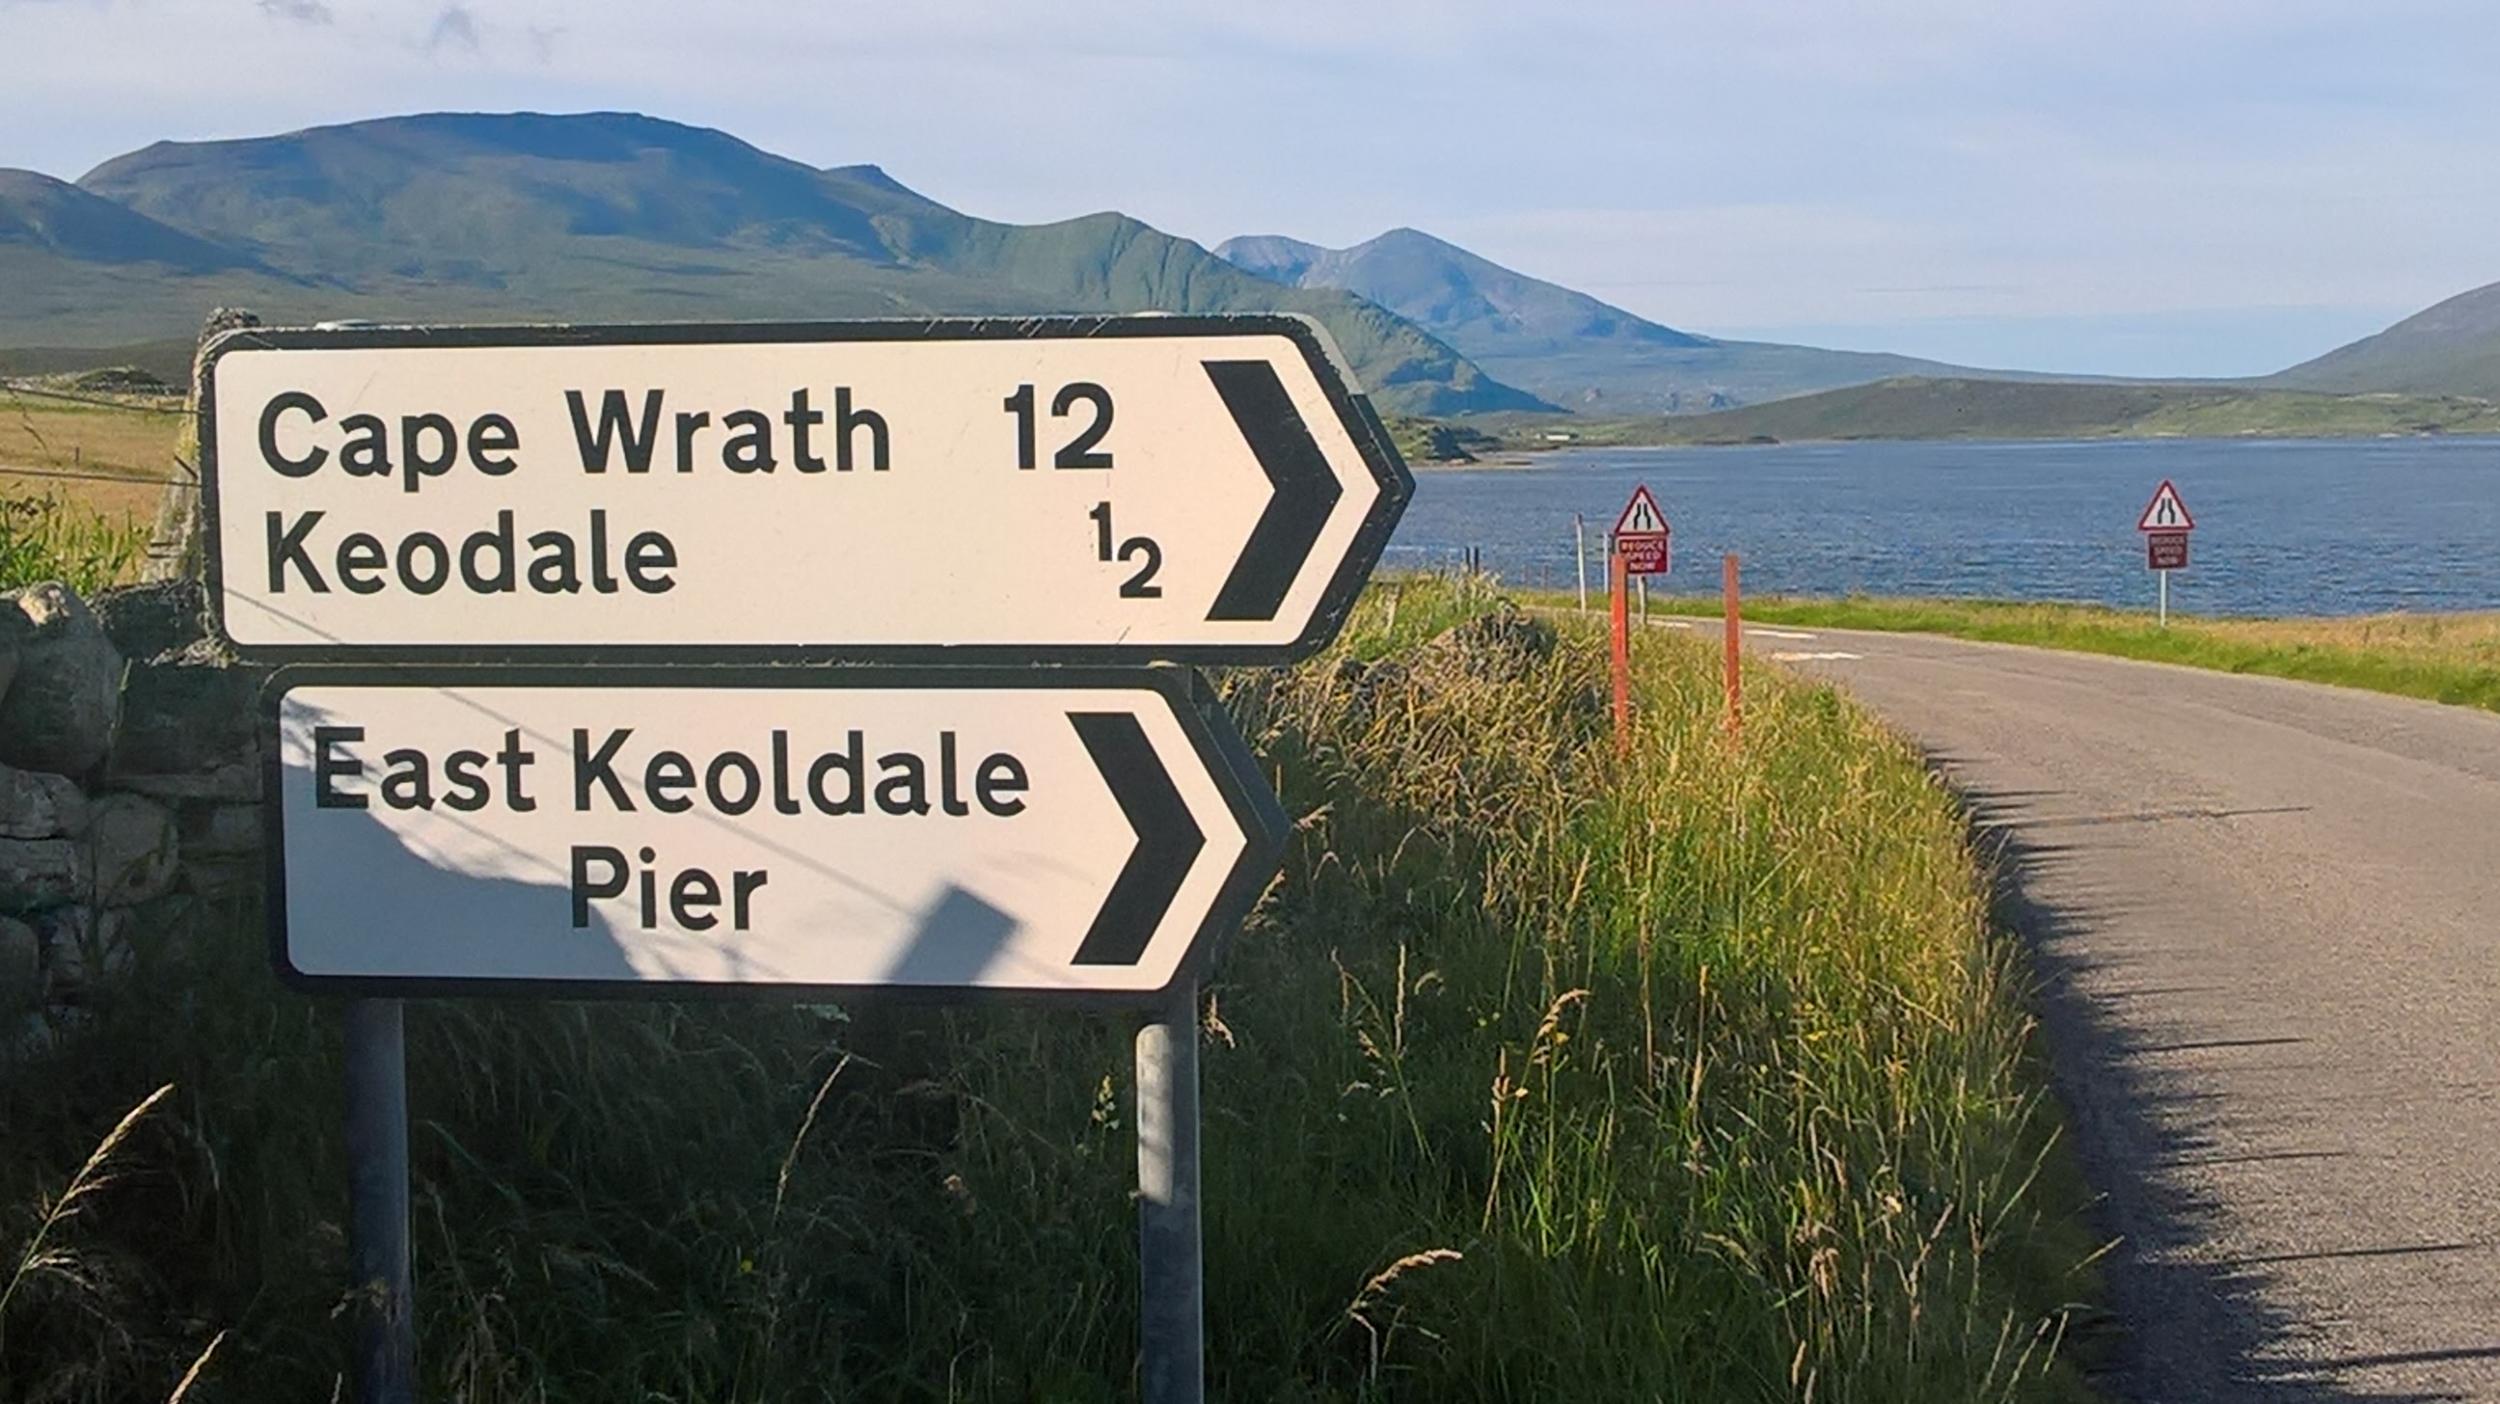 Cape Wrath is Britain’s most north-westerly mainland point